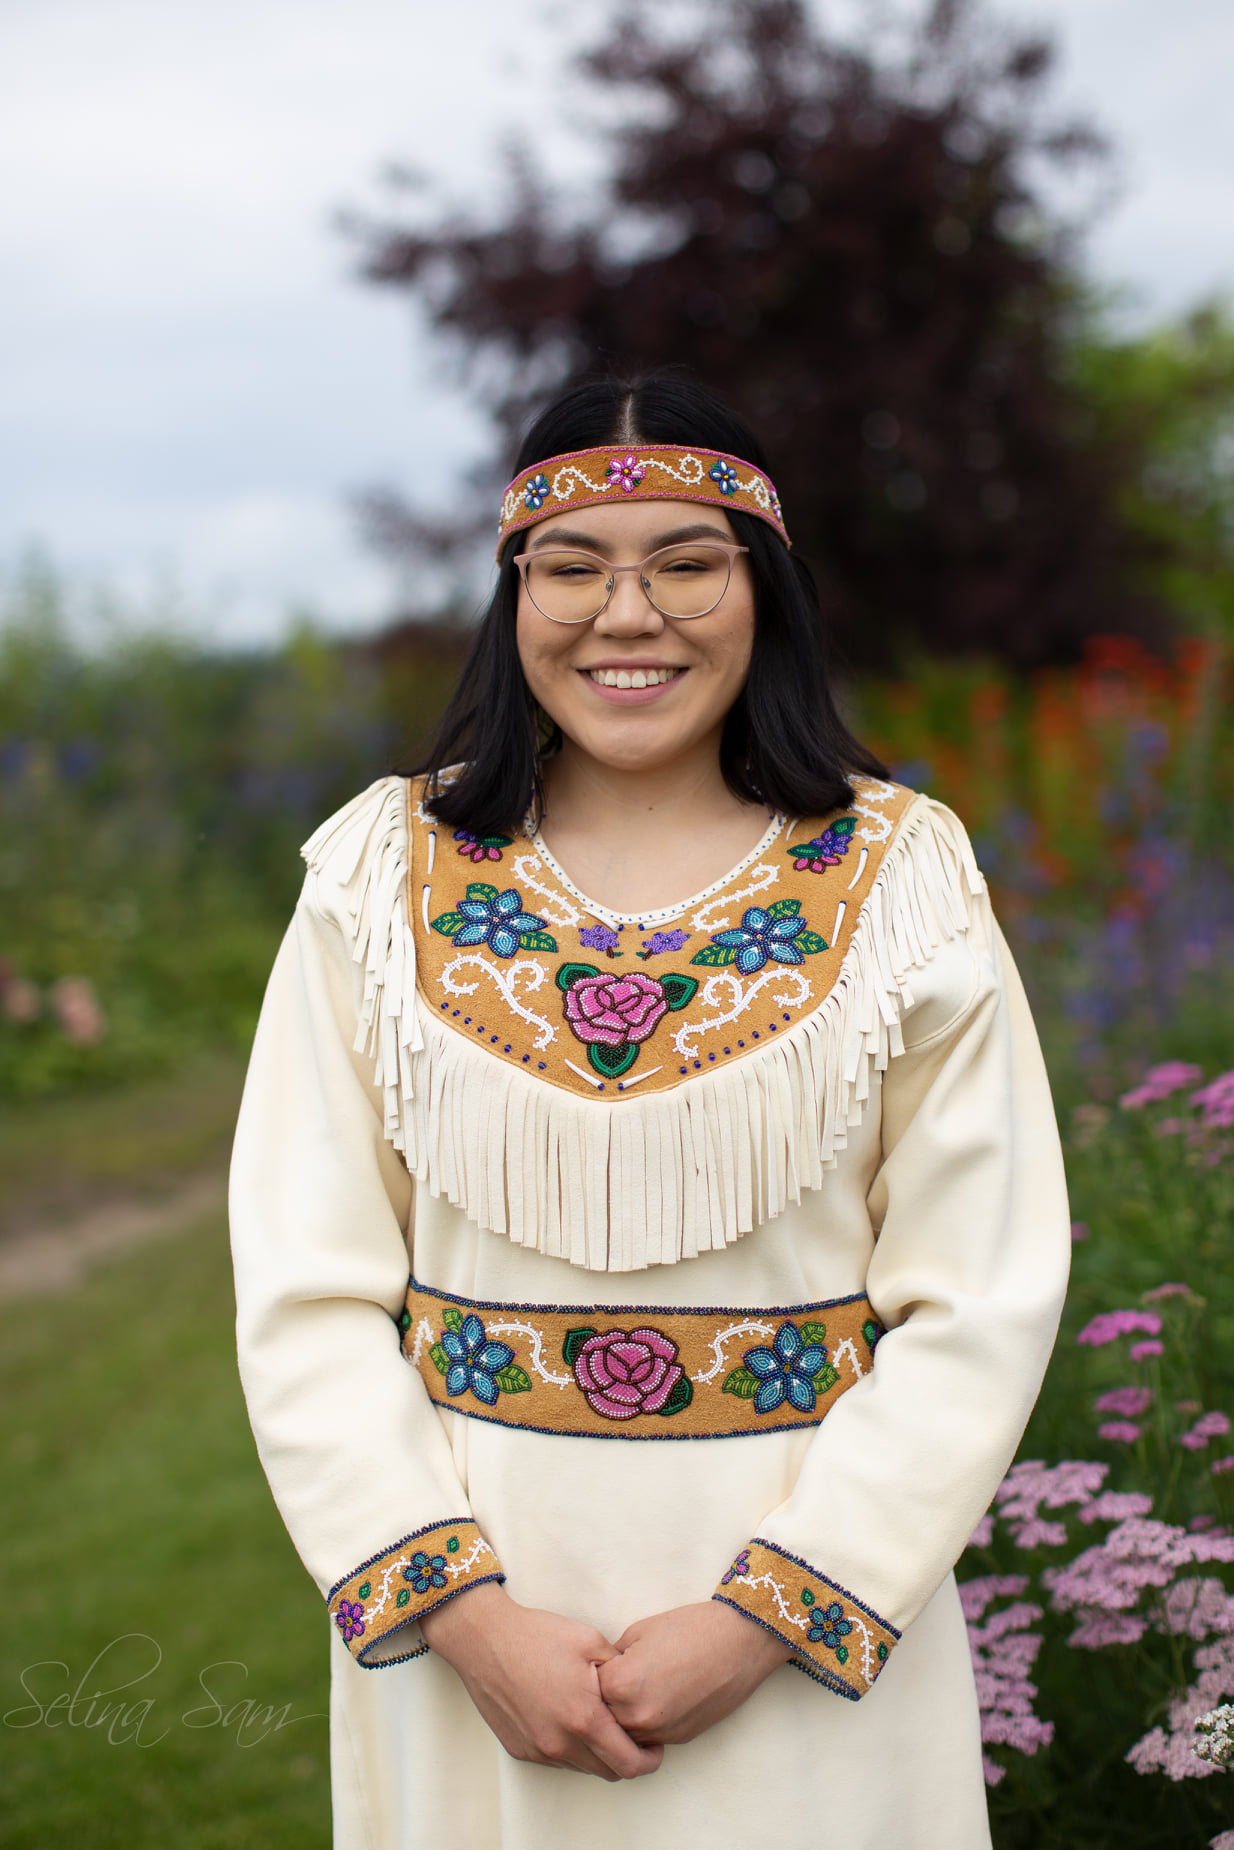 Laura Ekada stands outdoors among wildflowers in bloom in her traditional Athabascan regalia.